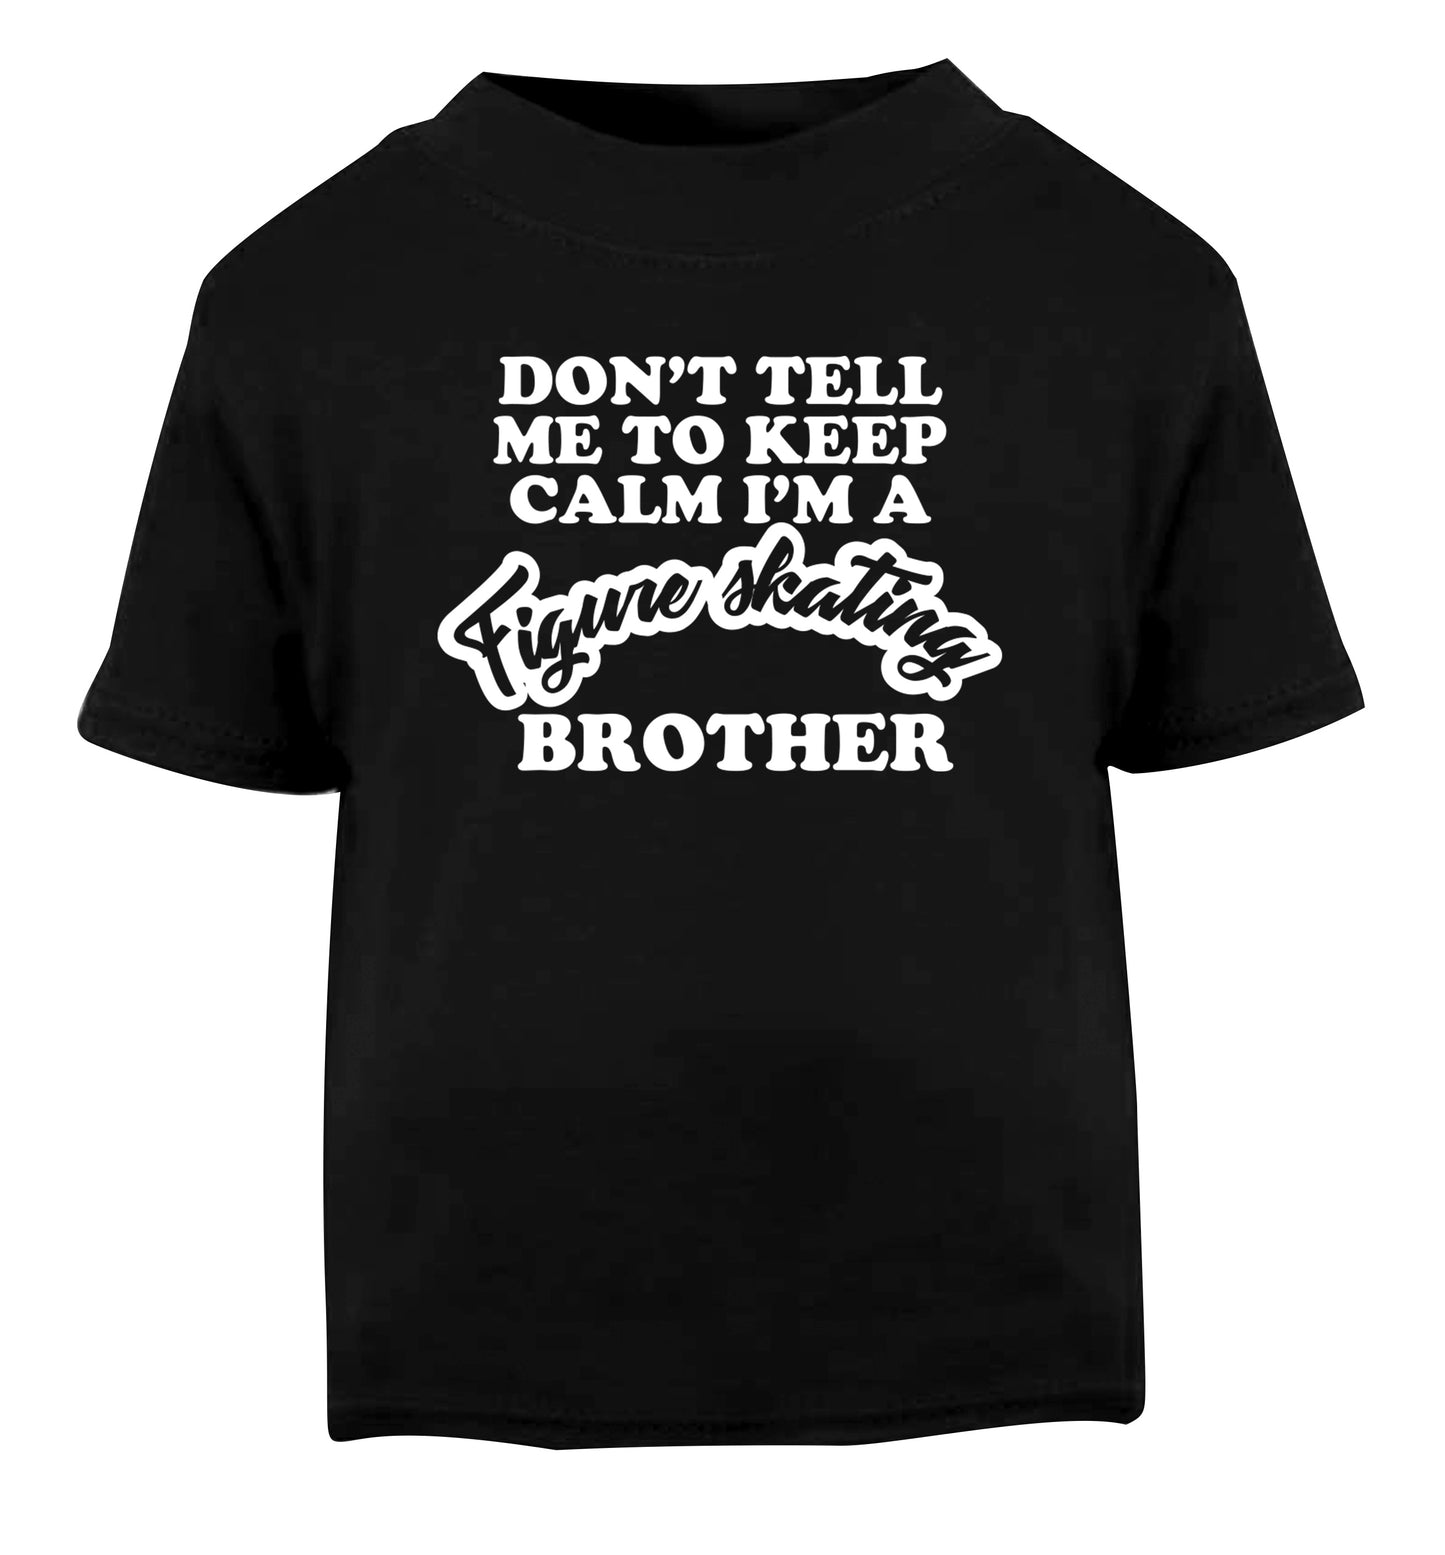 Don't tell me to keep calm I'm a figure skating brother Black Baby Toddler Tshirt 2 years